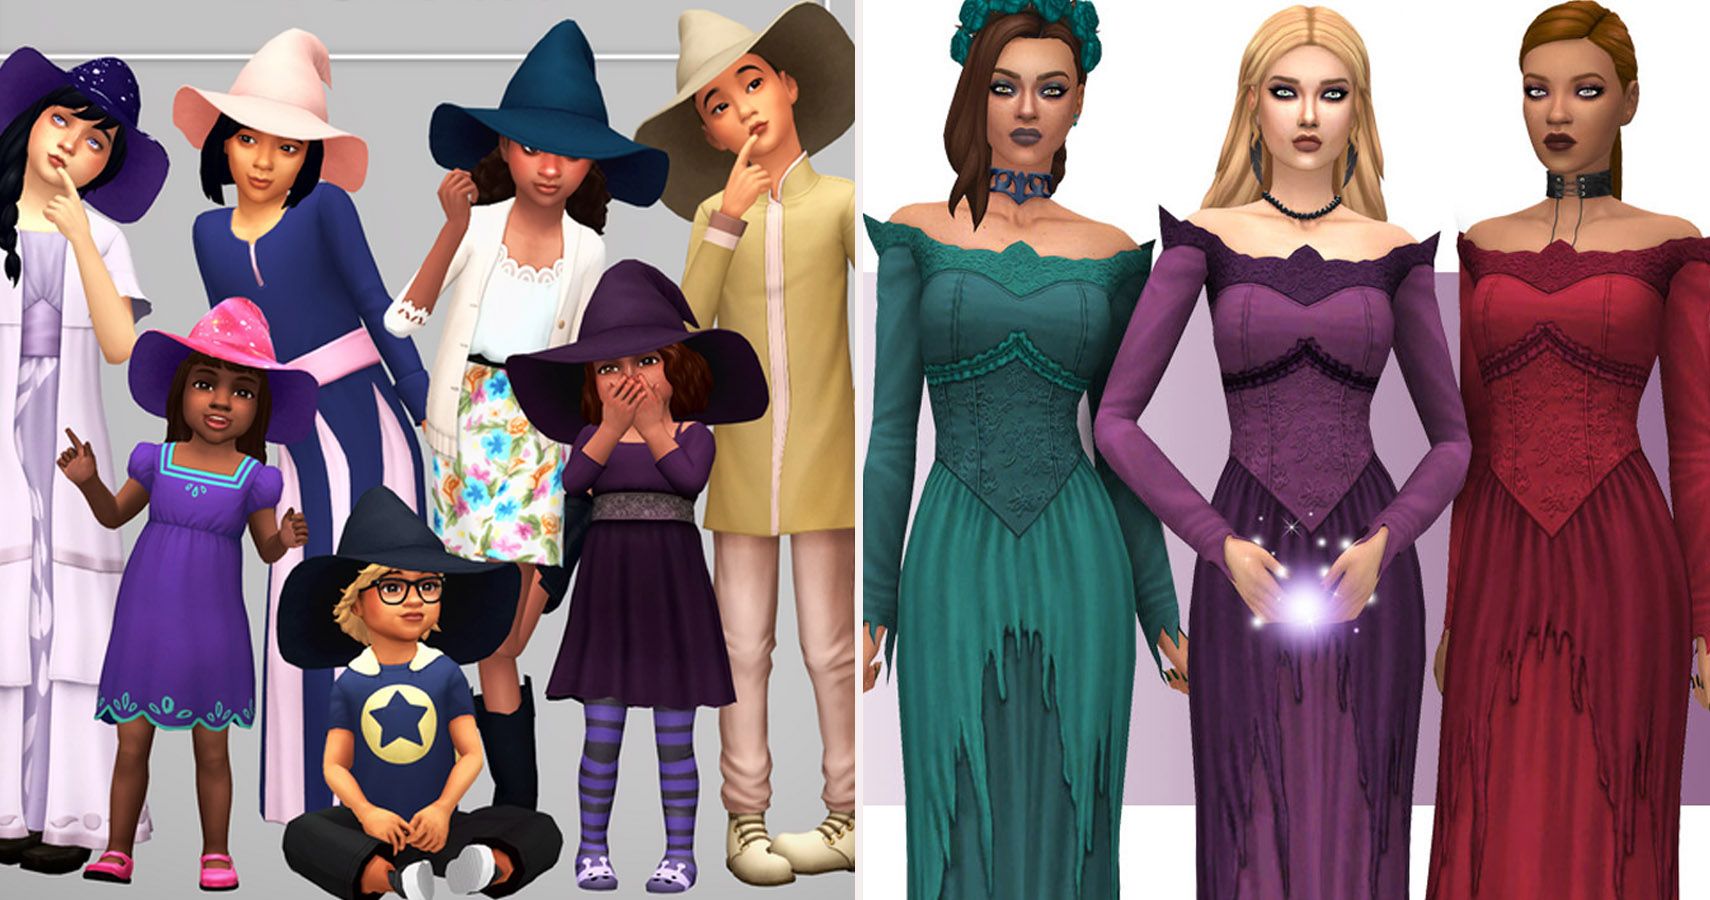 sims 4 witches and wizards mod pack